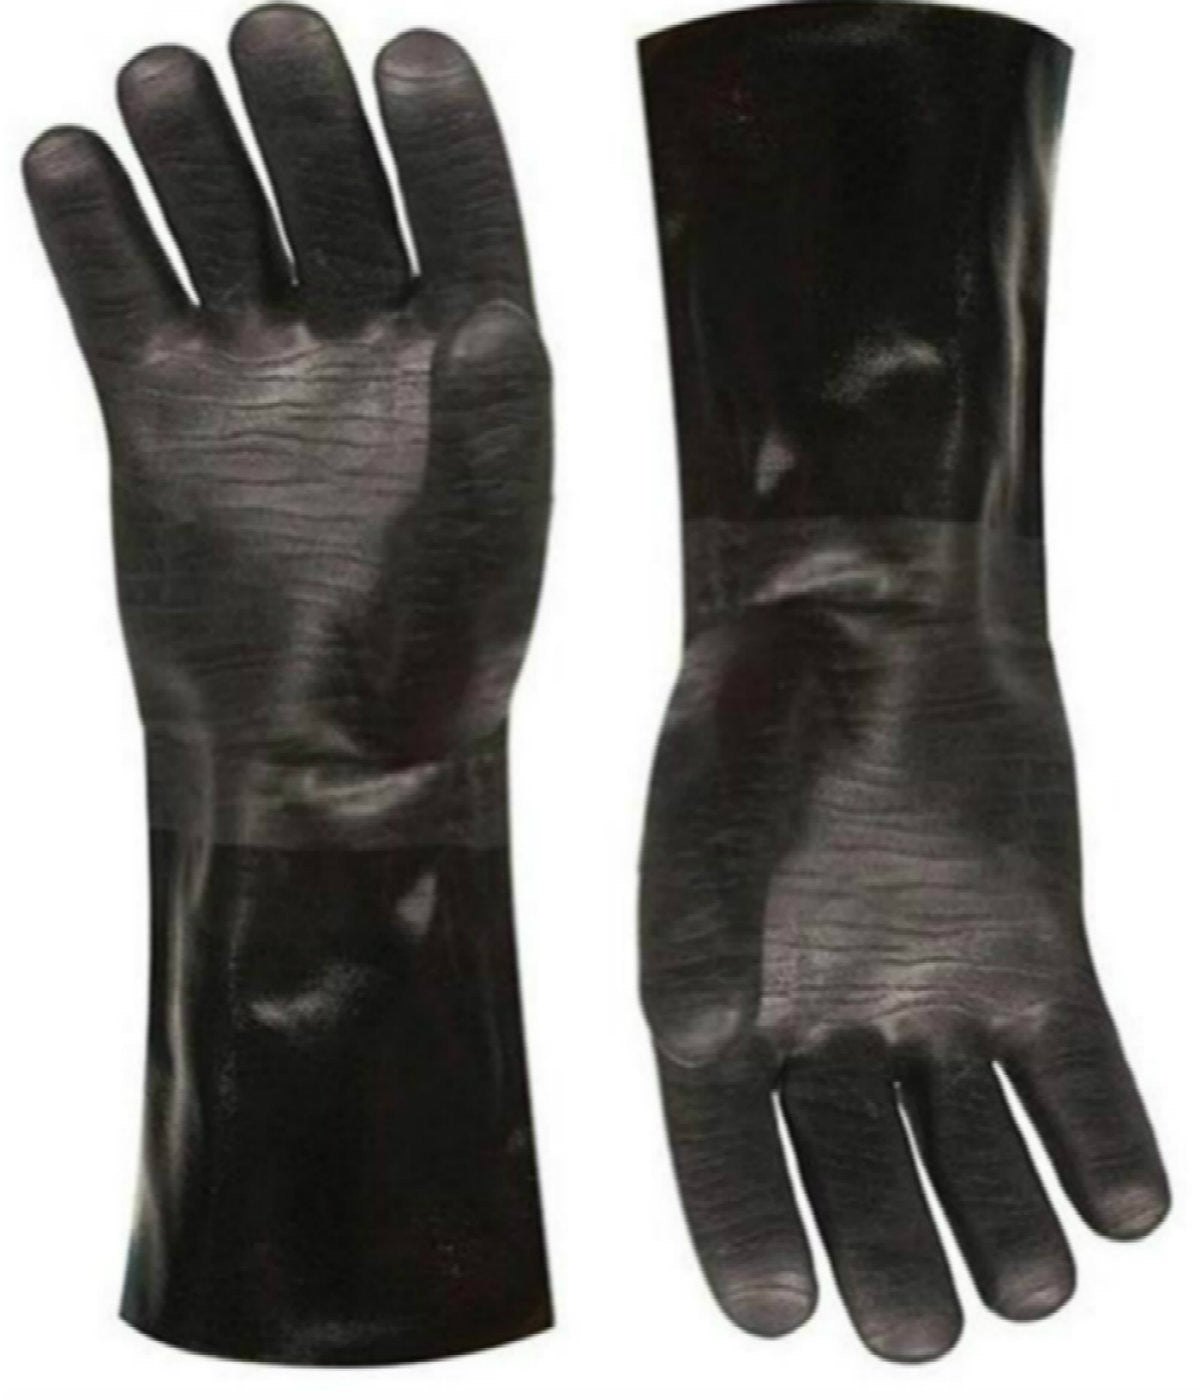 4 Pairs Oven Gloves with Fingers,Heat Resistant Gloves for Cooking,Grill  USA